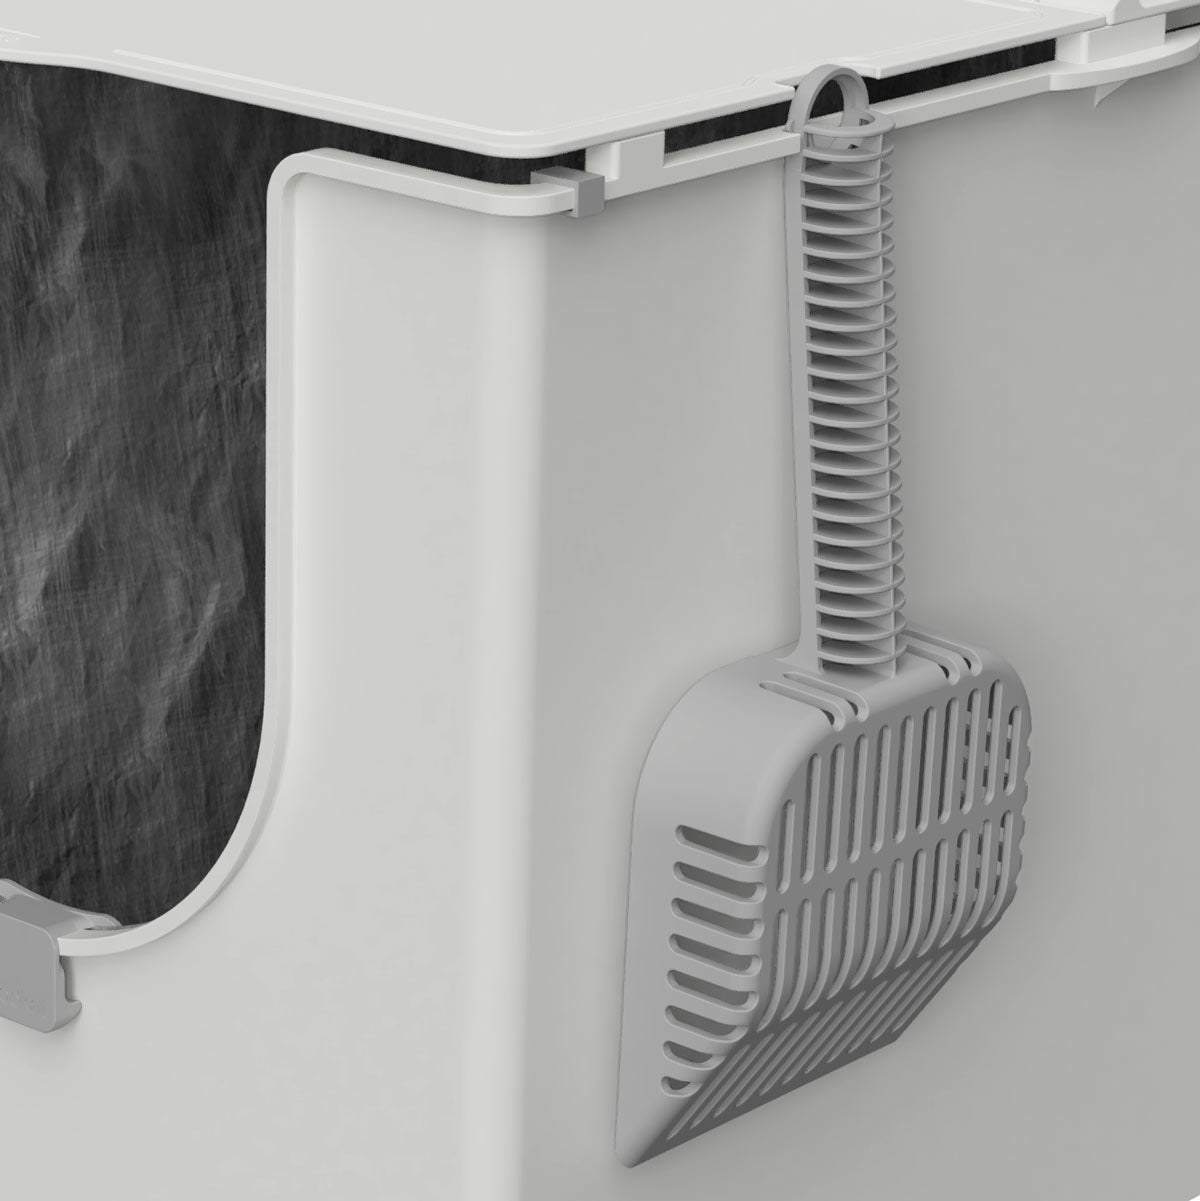 Slotted Scoop hanging on the Flip Litter Box